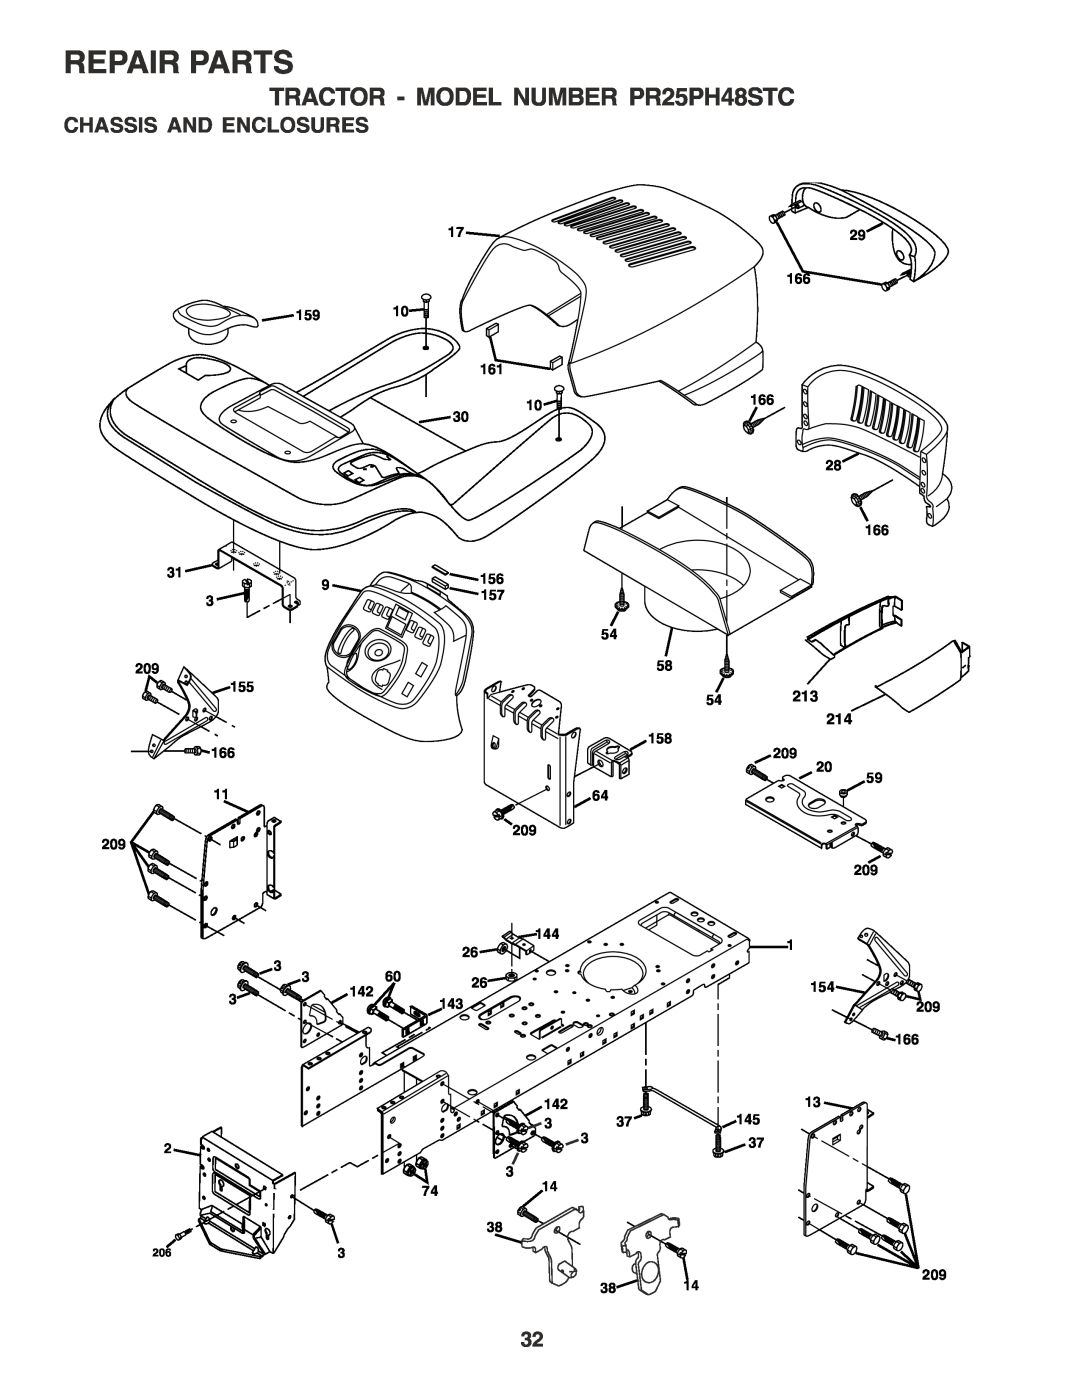 Poulan owner manual Chassis And Enclosures, Repair Parts, TRACTOR - MODEL NUMBER PR25PH48STC 